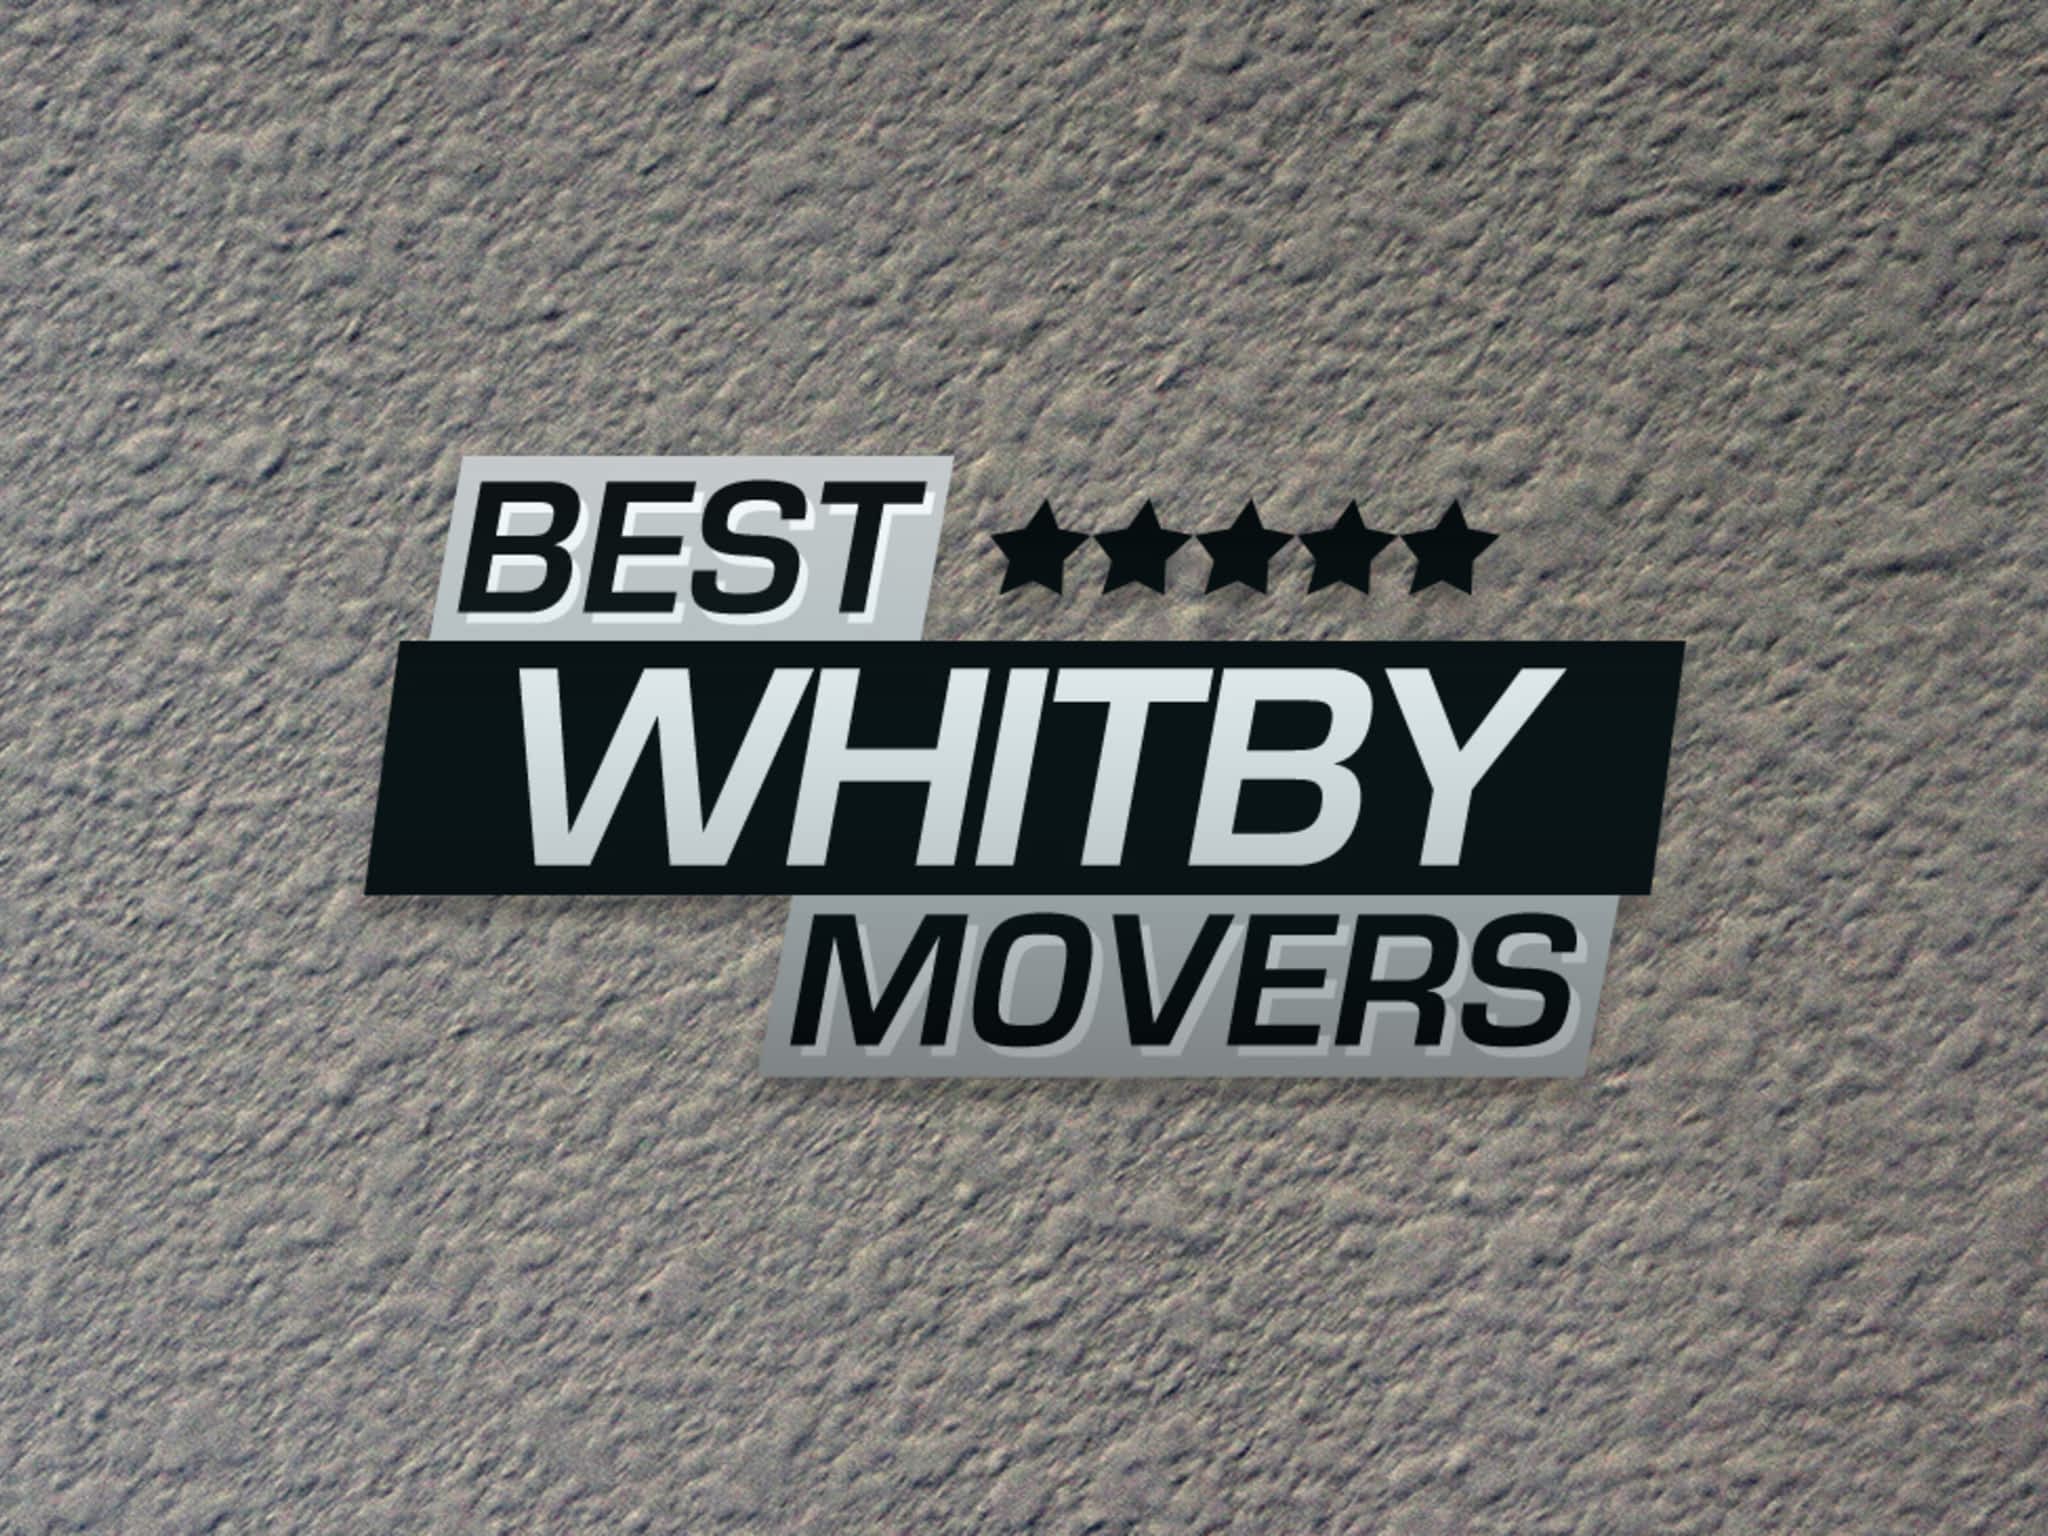 photo Best Whitby Movers